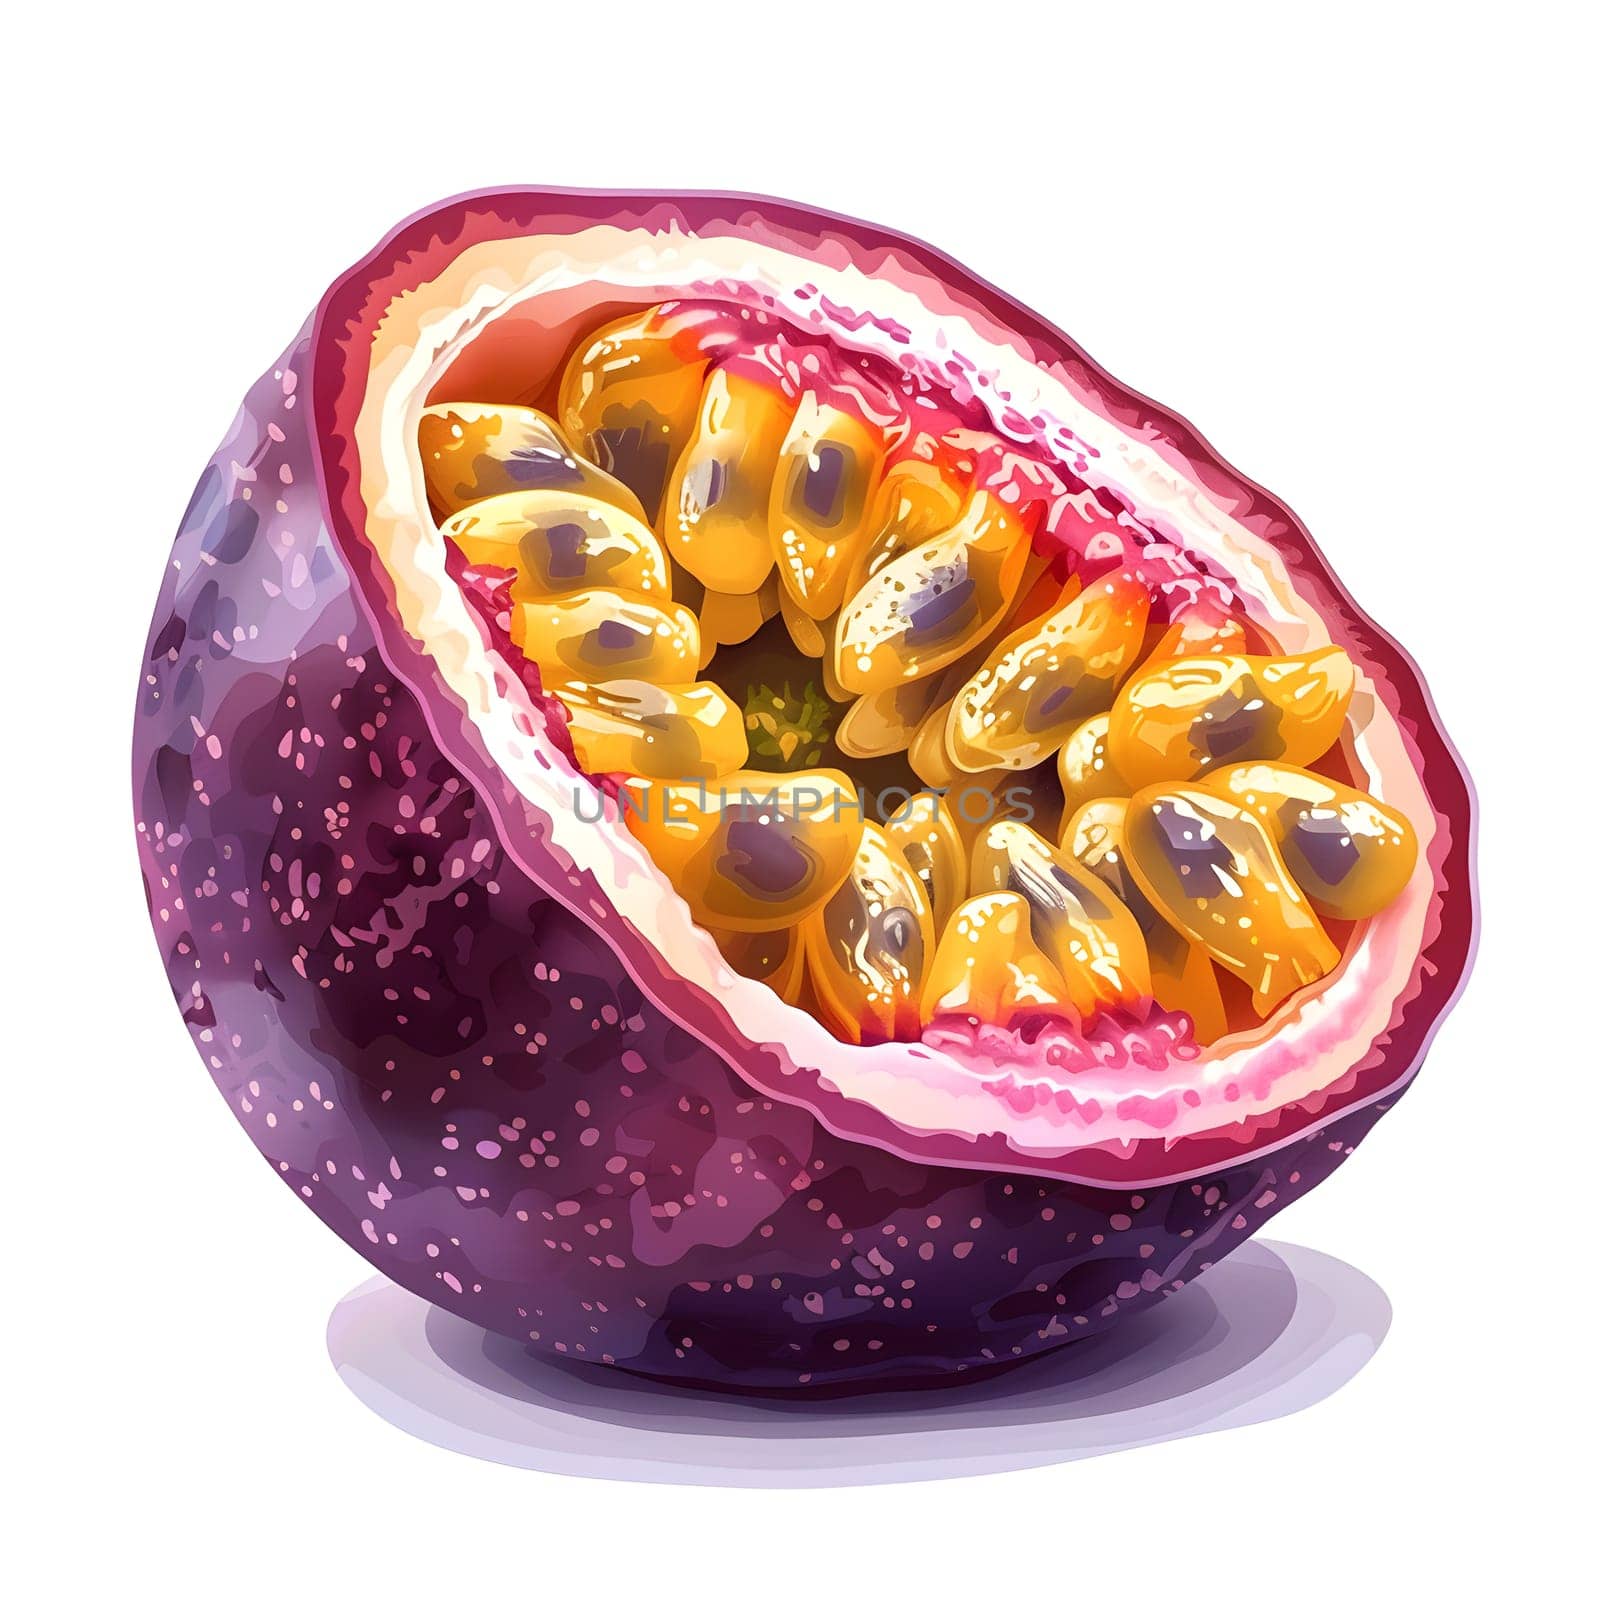 A visually stunning purple passion fruit, a staple food and natural ingredient in various cuisines, showcased cut in half on a white background